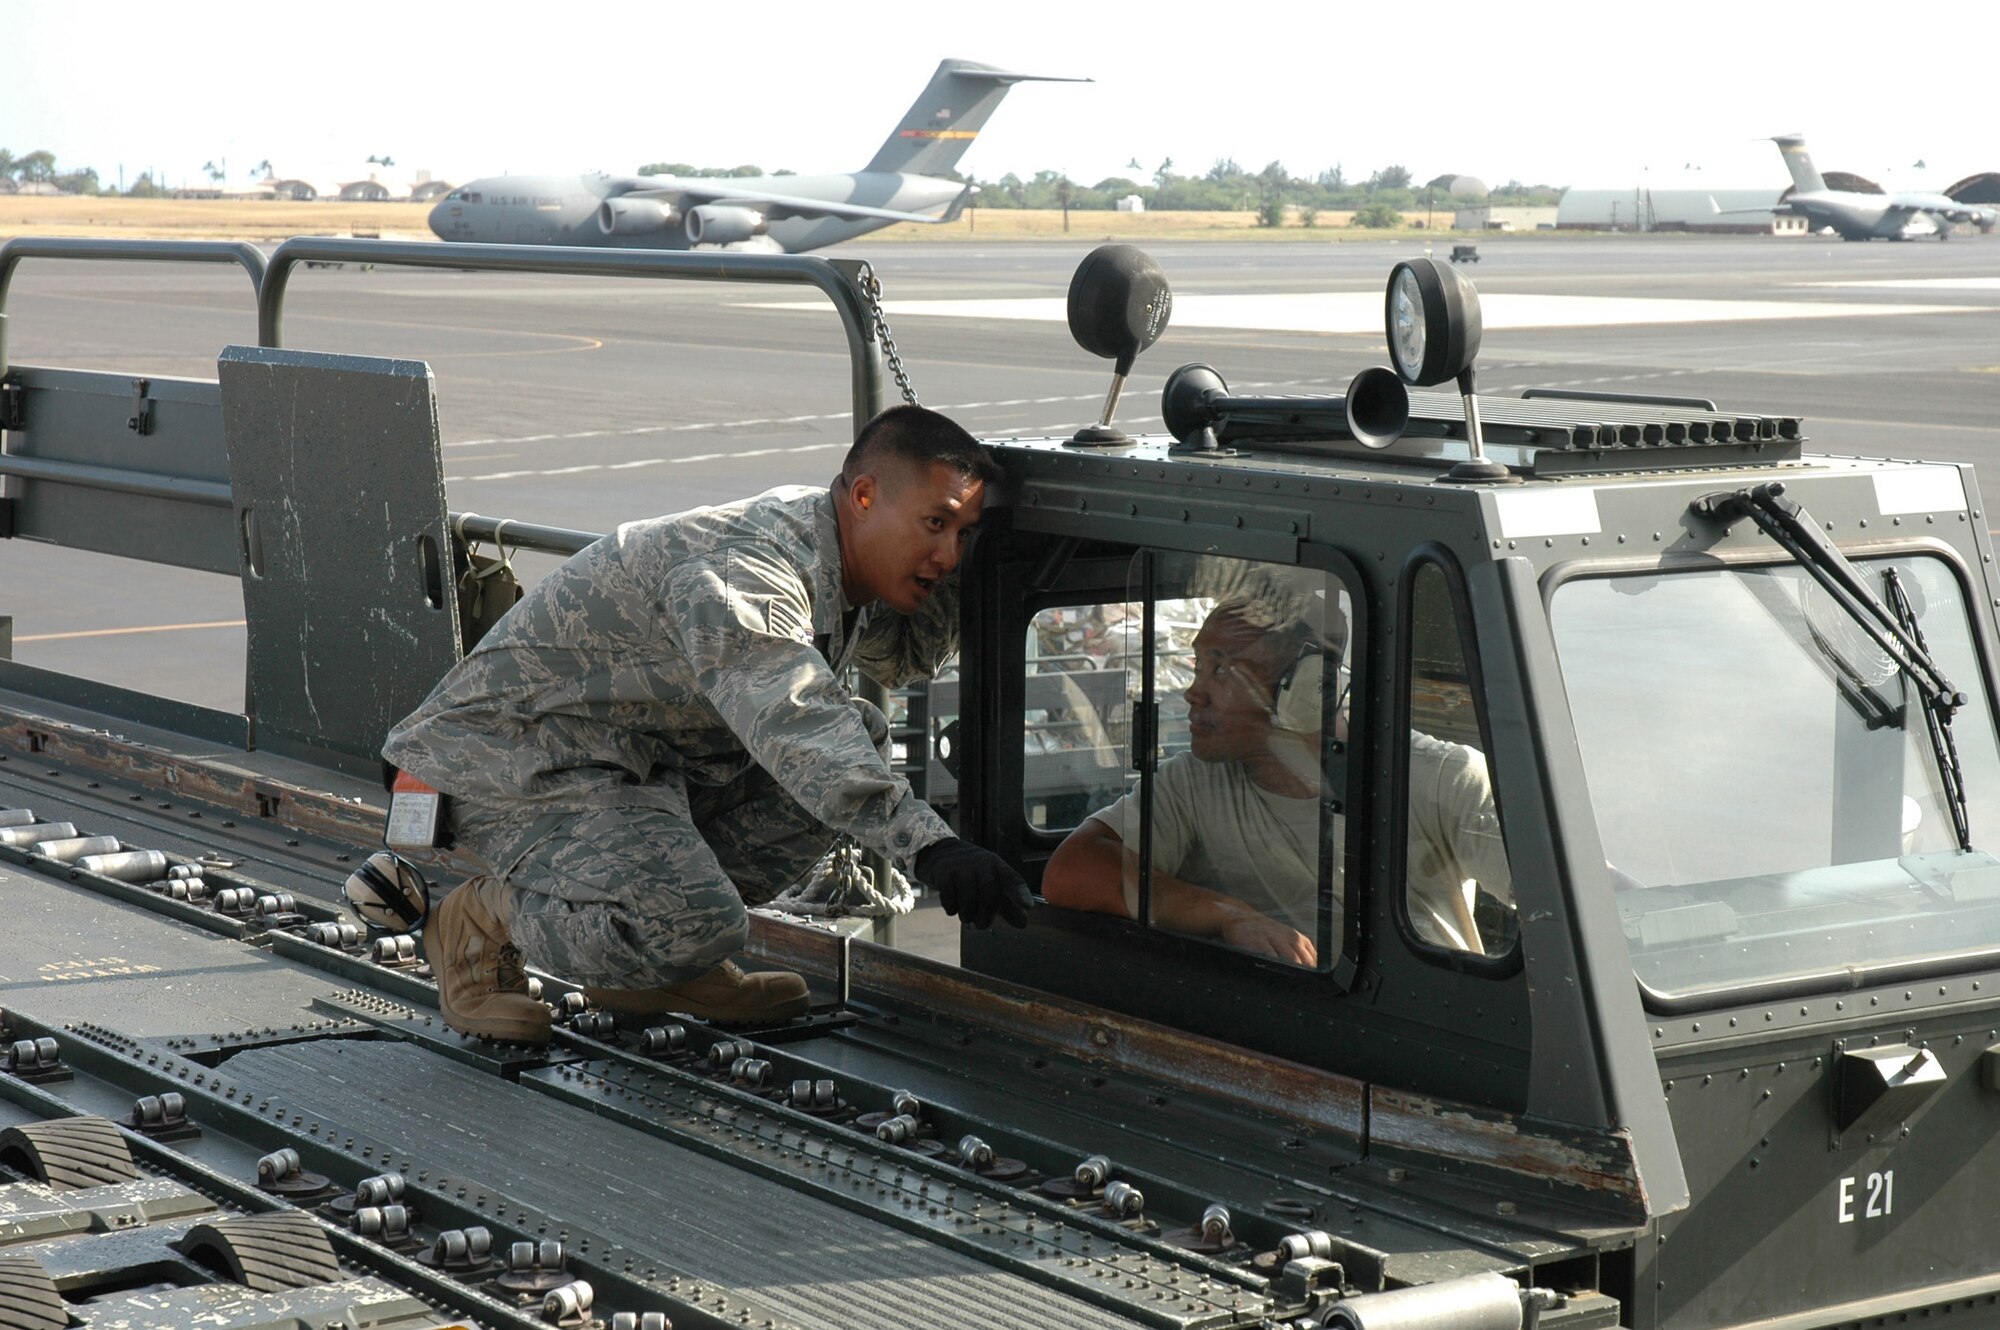 Tech. Sgt. Daniel Elvenia, left, and Senior Airman Derek Dumlao discuss the best approach for loading cargo May 16, 2009, during their May drill weekend at Hickam Air Force Base, Hawaii. They are reservists with the 48th Aerial Port Squadron, which was named the Air Force's best Air Reserve Component Air Transportation Activity for 2008. The squadron is part of the 624th Regional Support Group at Hickam. (U.S. Air Force photo/Capt. Christy Stravolo)